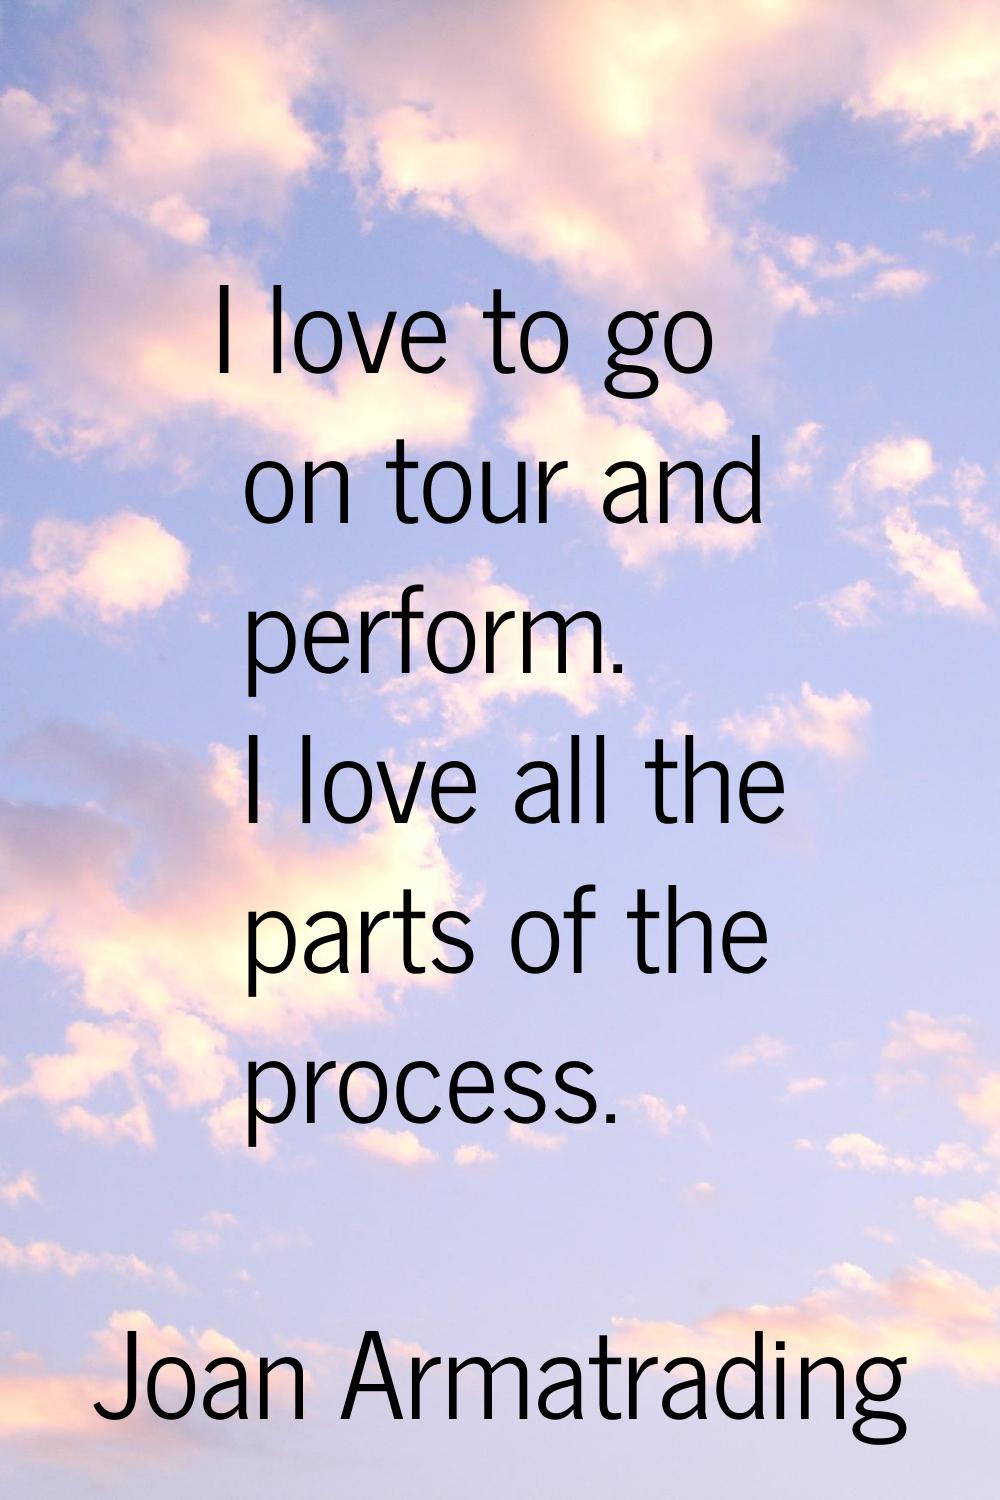 I love to go on tour and perform. I love all the parts of the process.